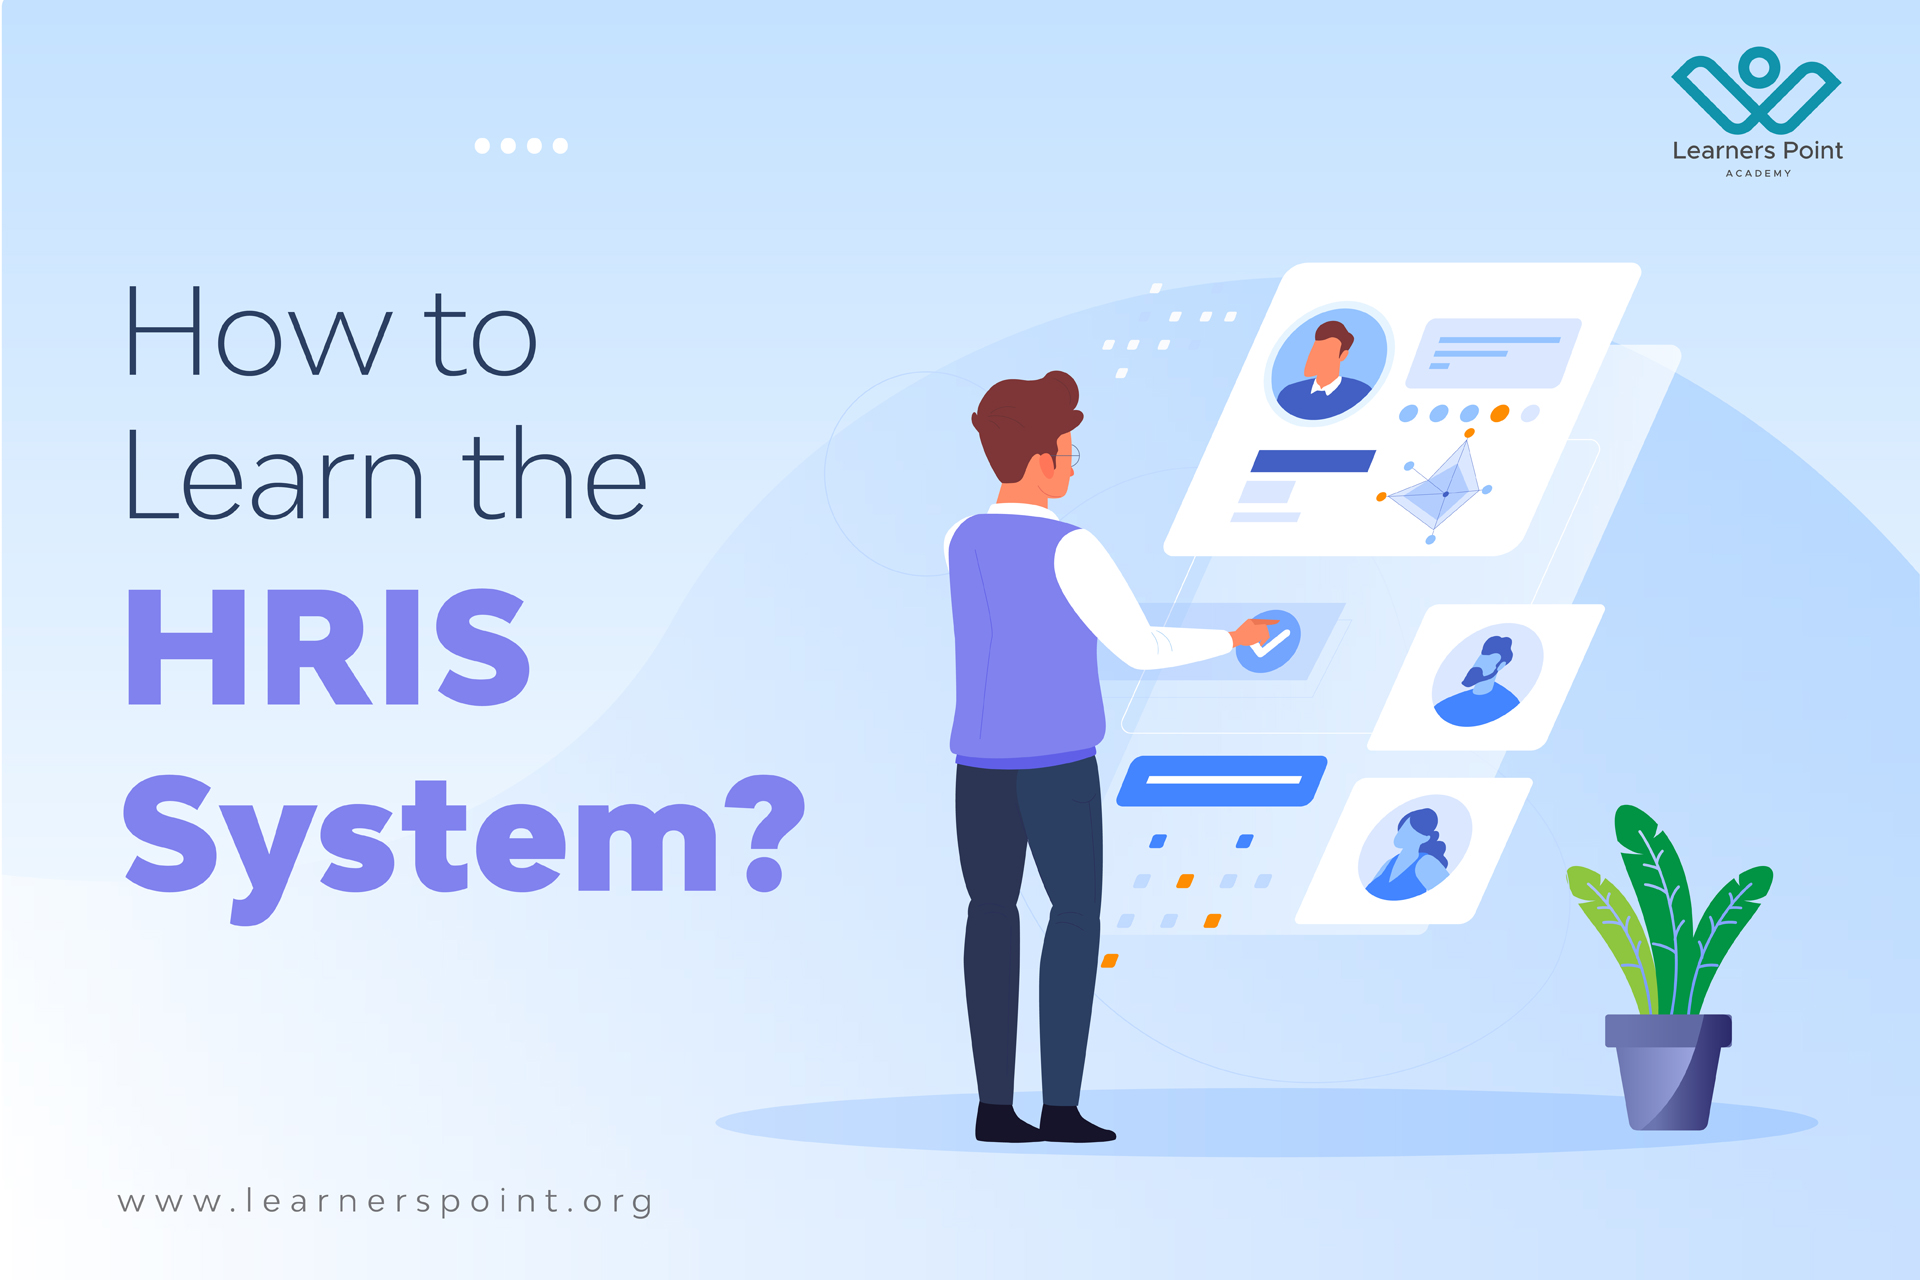 8 Kickass Tips to Learn the HRIS System